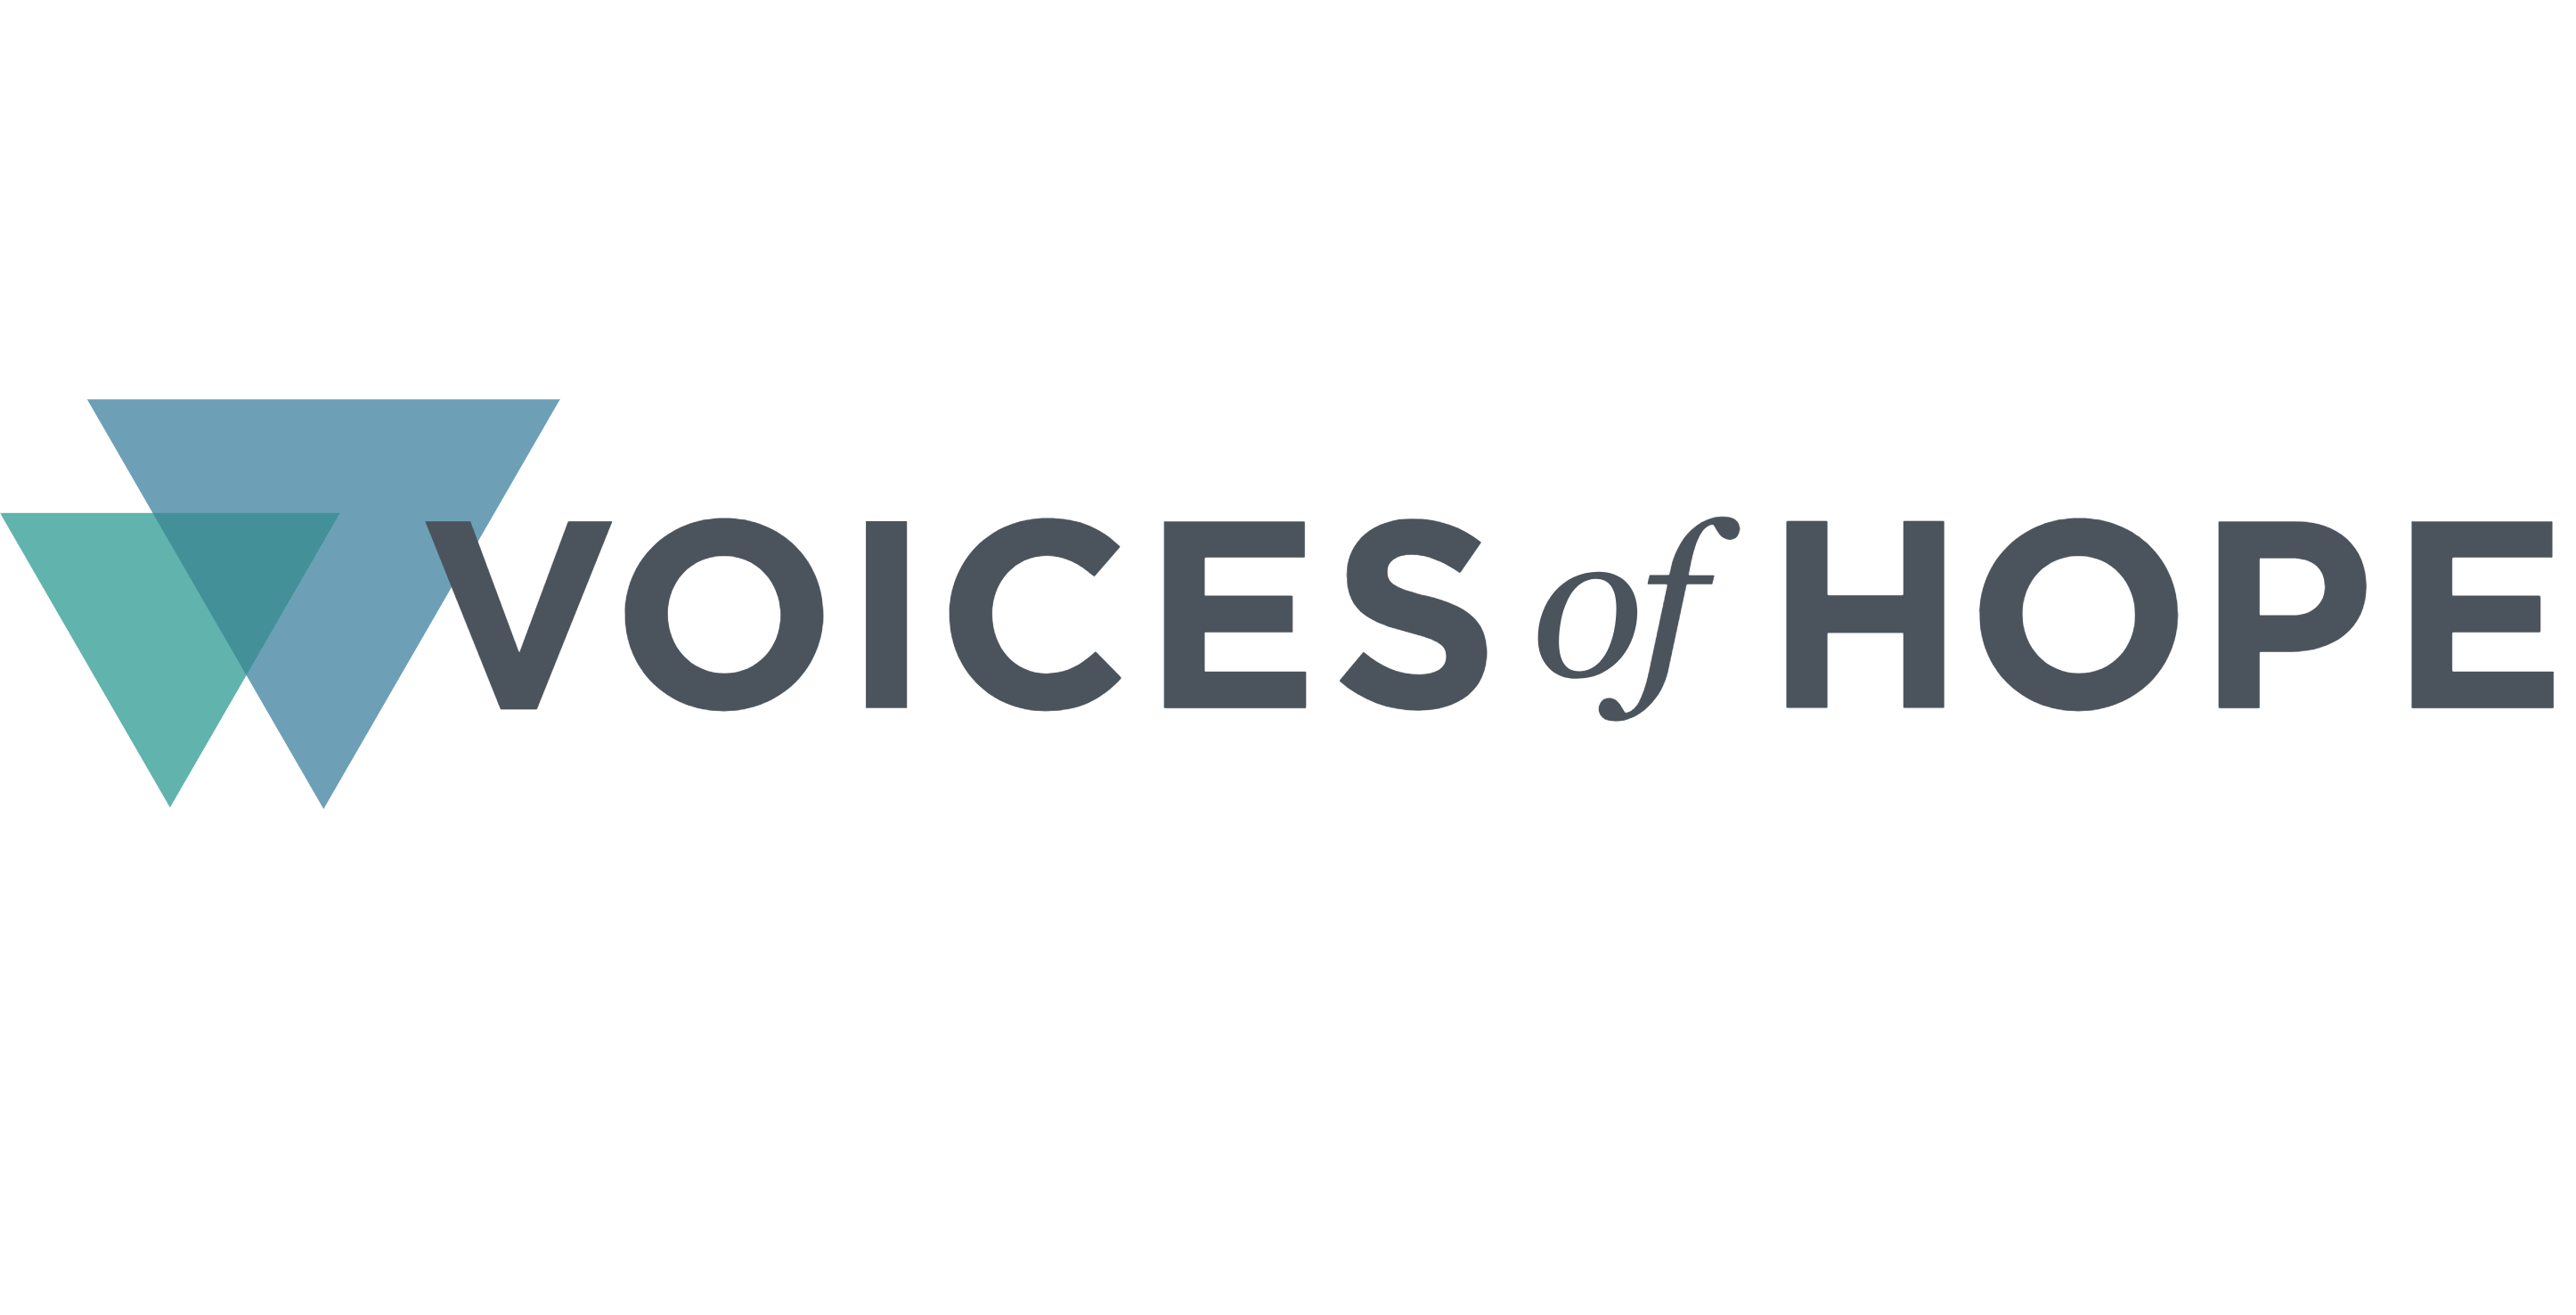 Lexington's Voices of Hope Receives $2 Million Gift From the Yield Giving Open Call